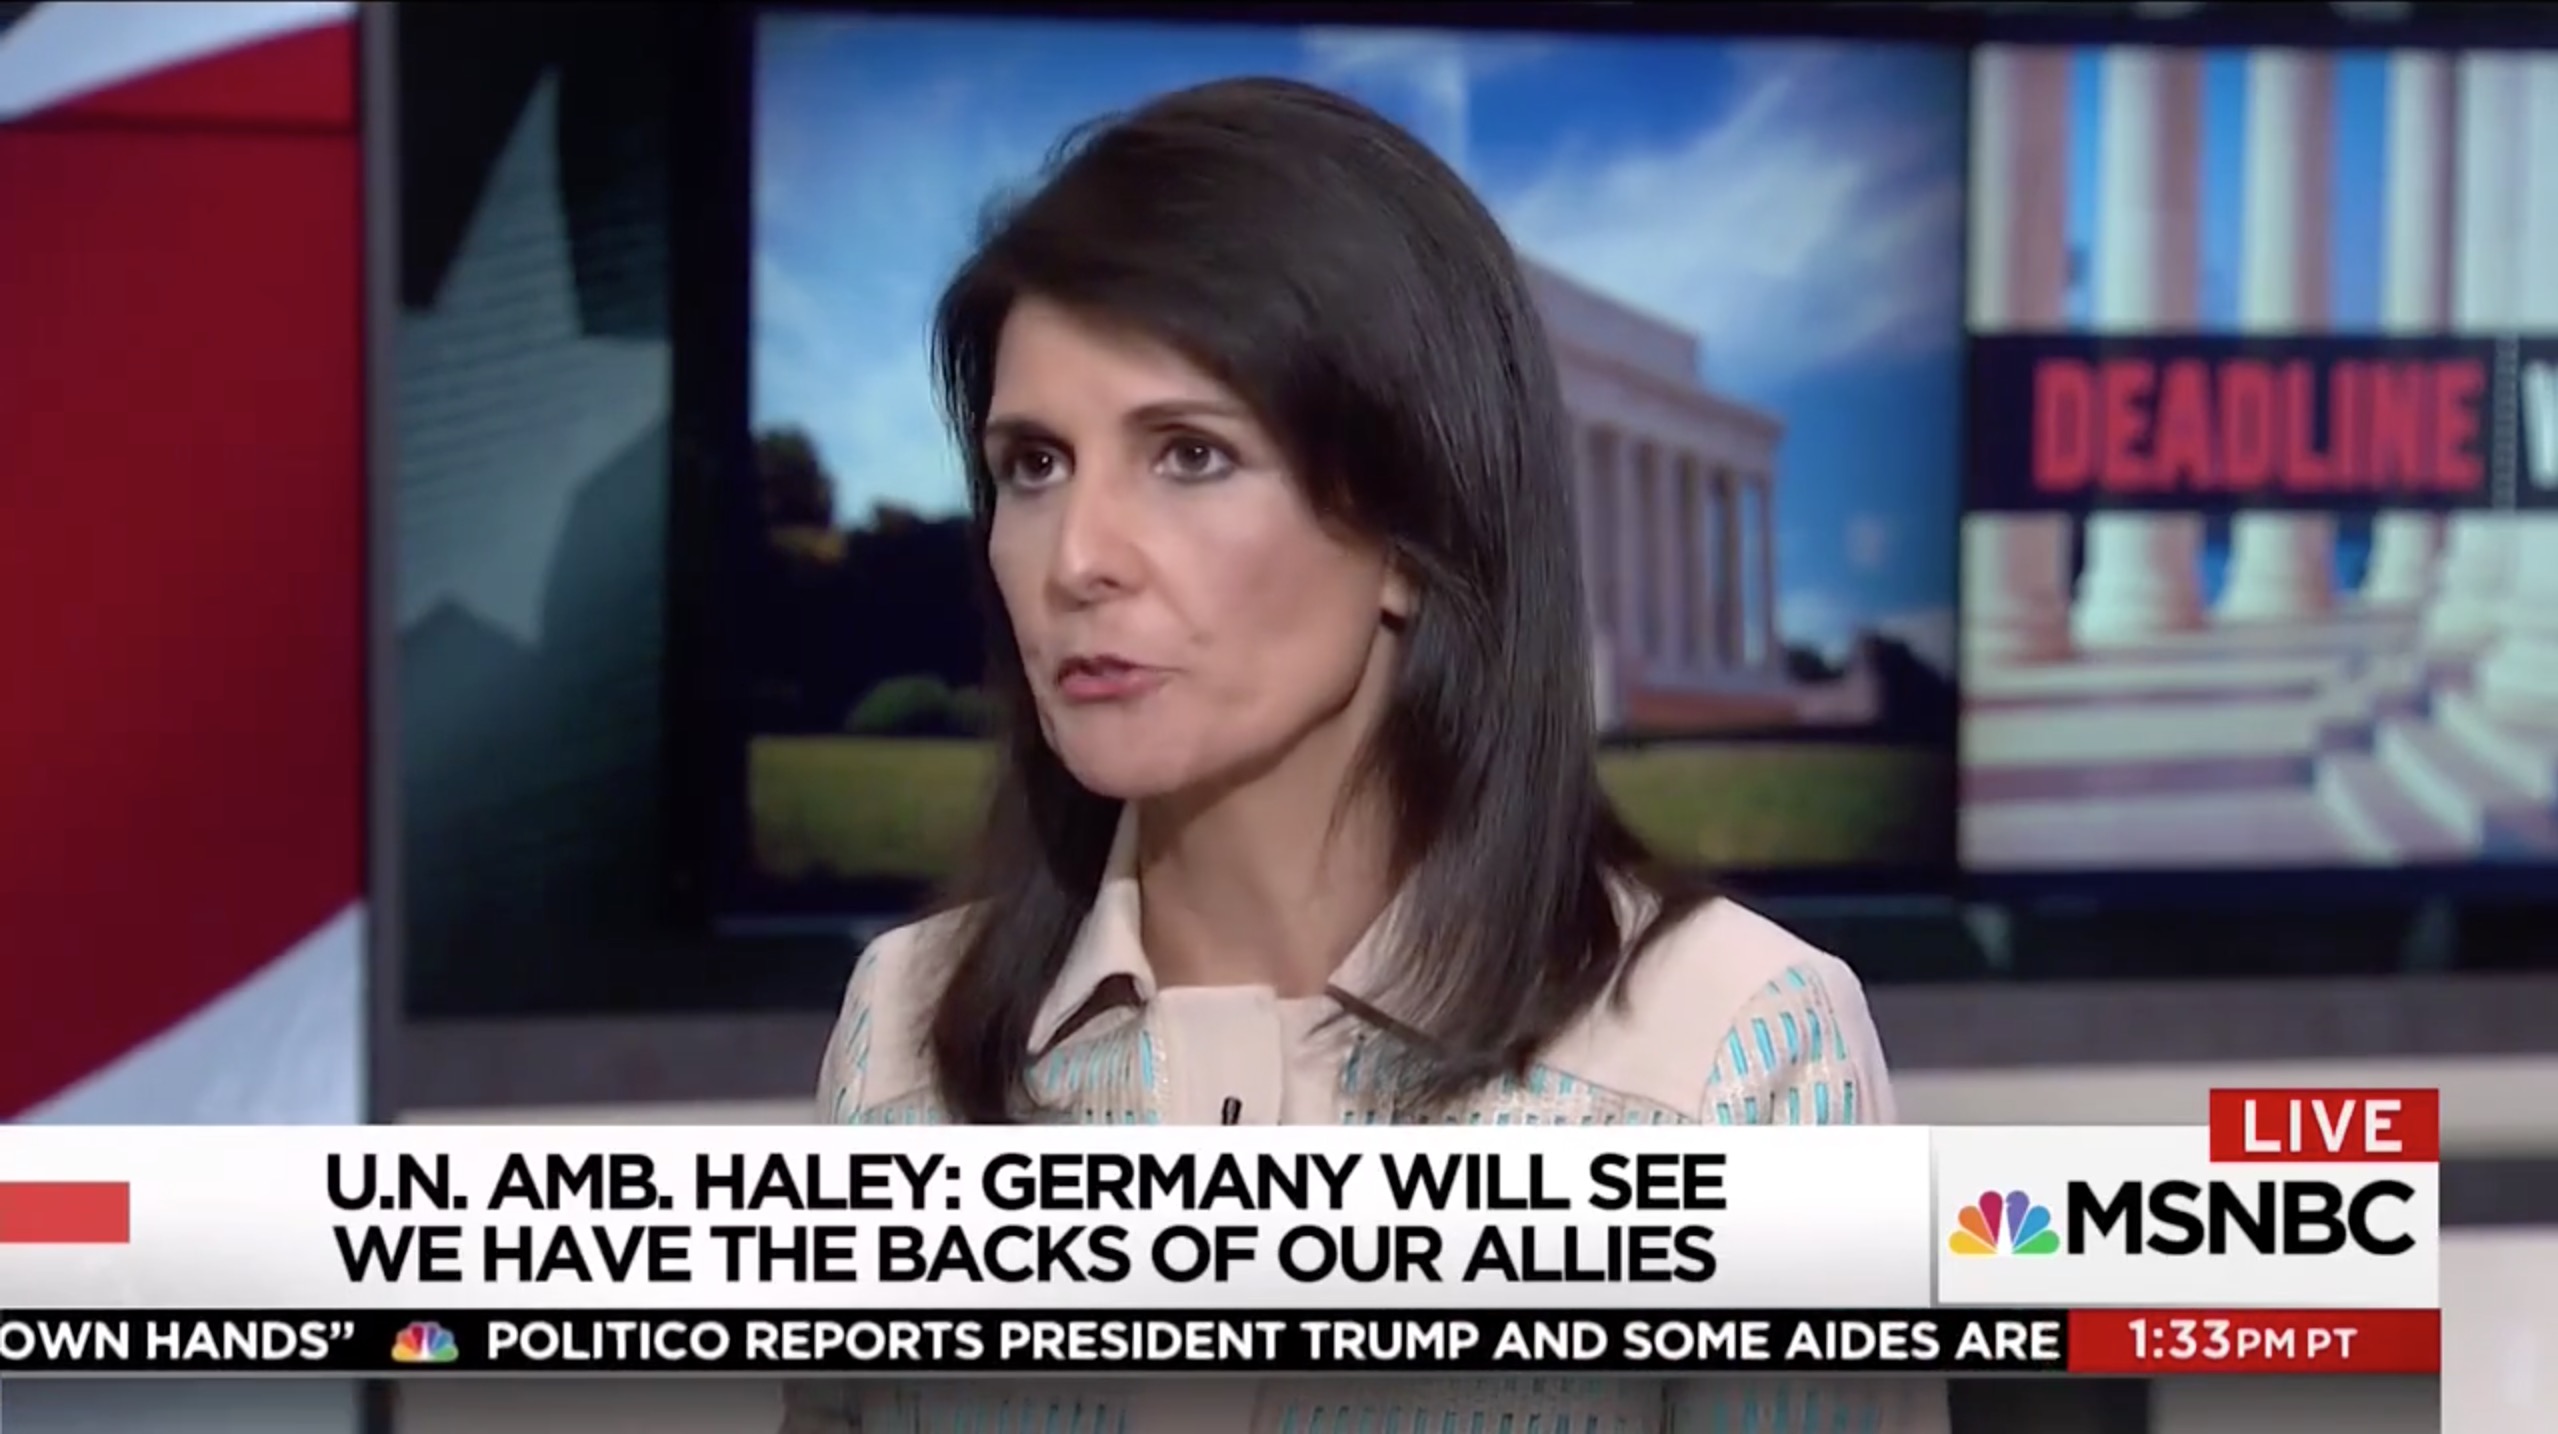 NIKKI HALEY FOREIGN POLICY